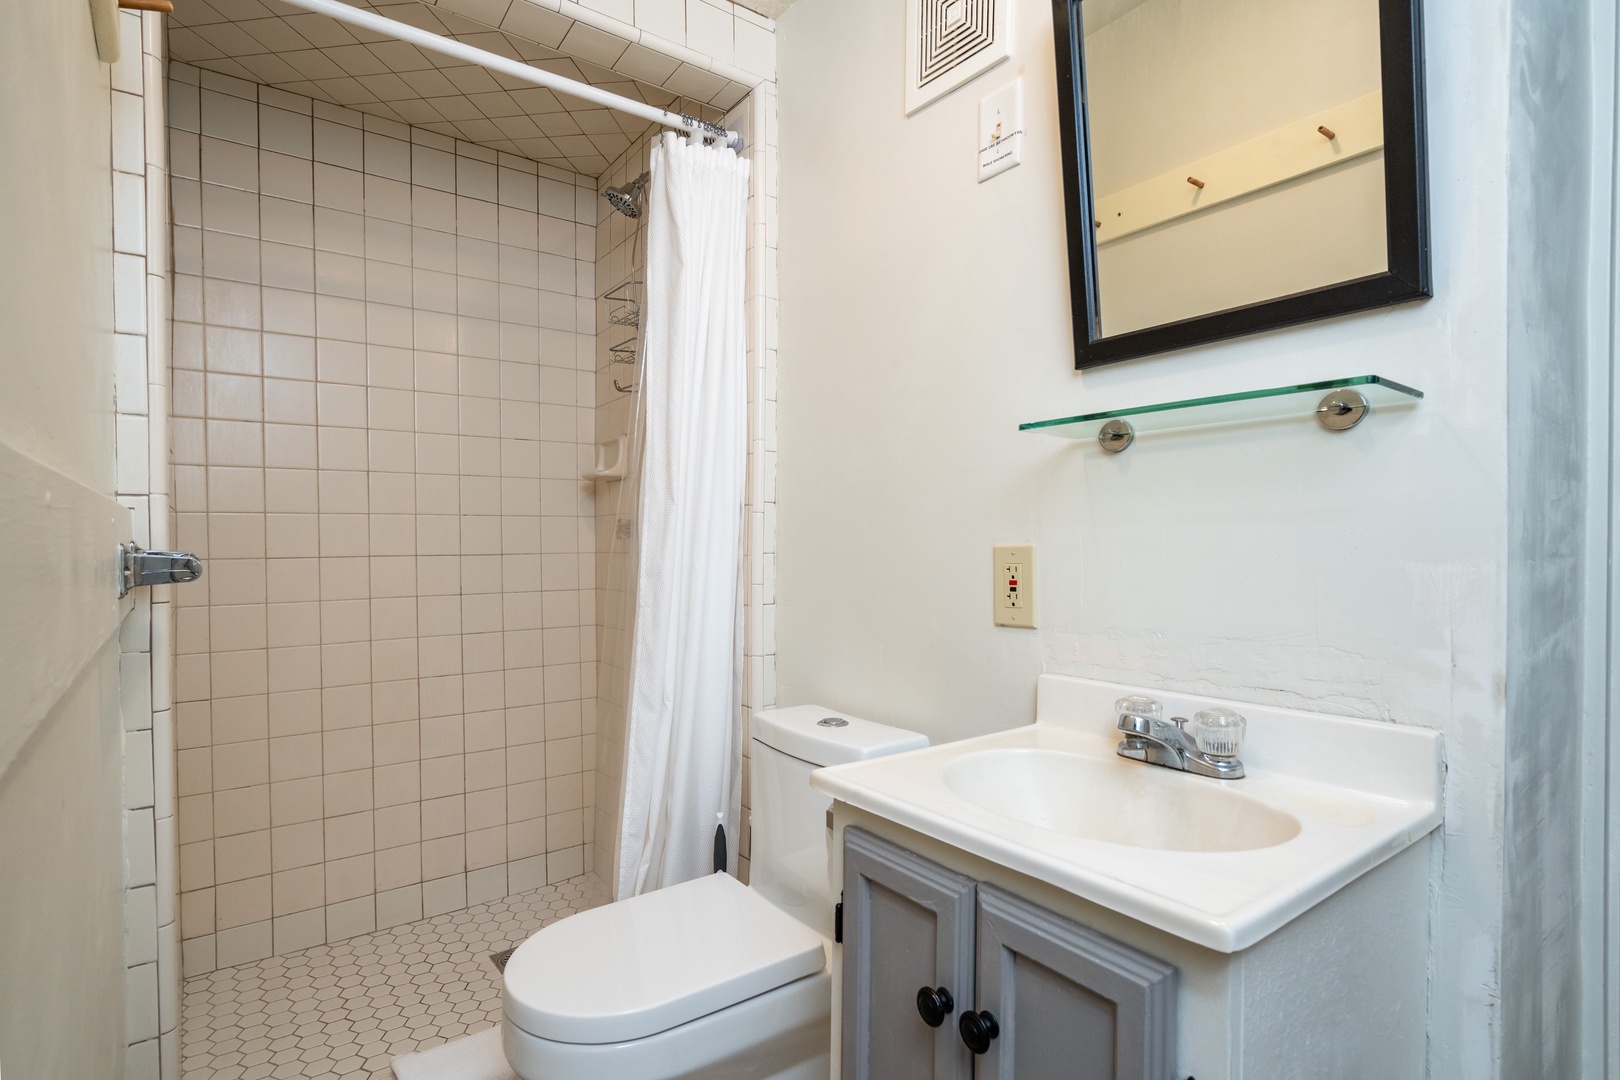 The full bathroom features a single vanity & walk-in shower